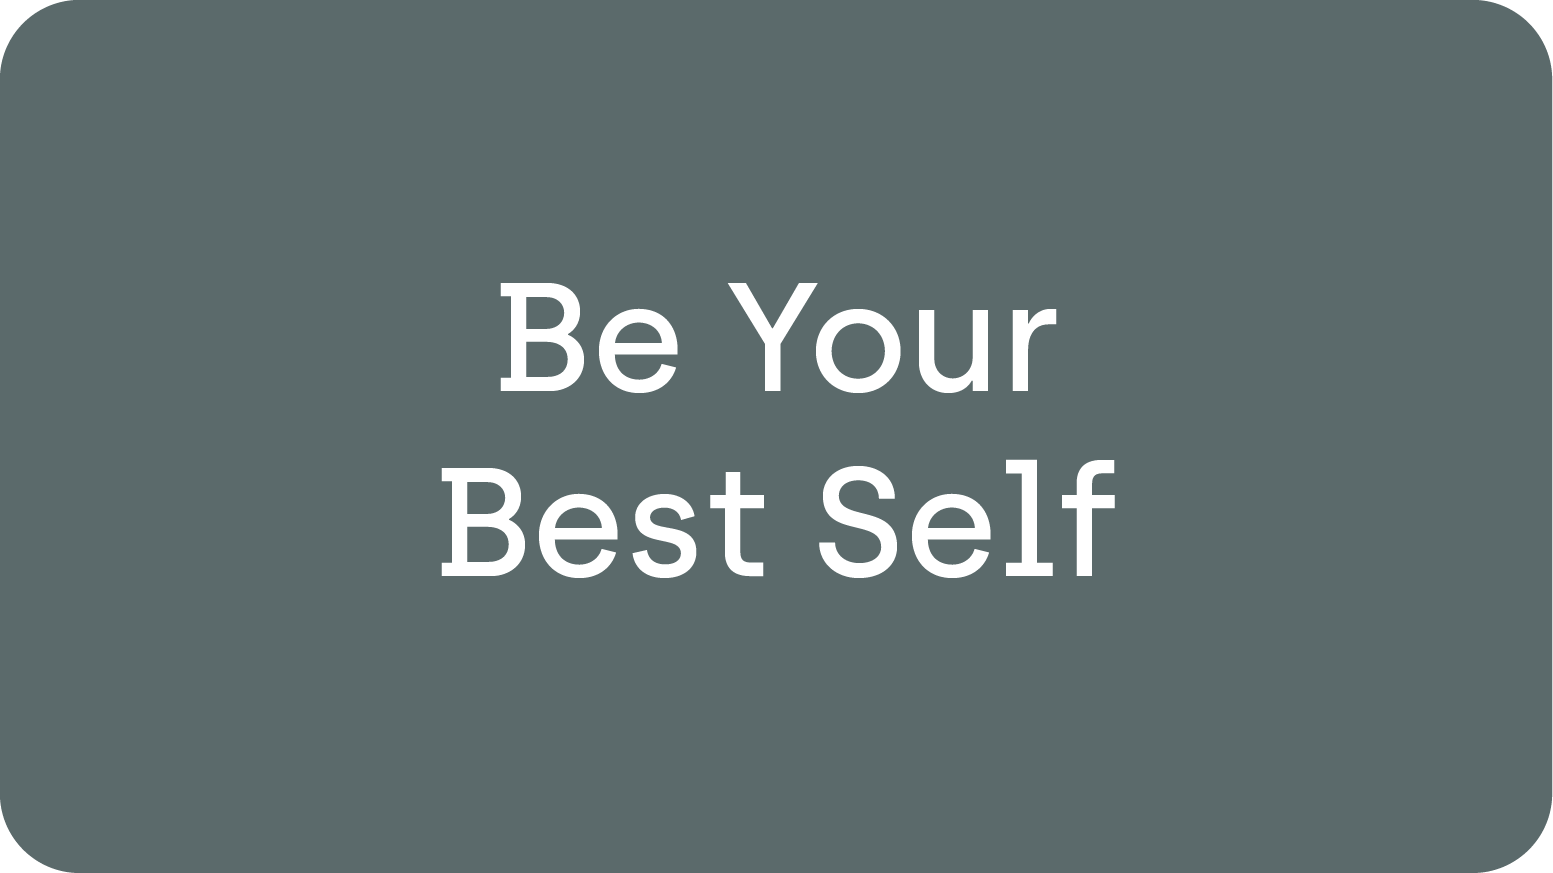 The Be Your Best Self Program